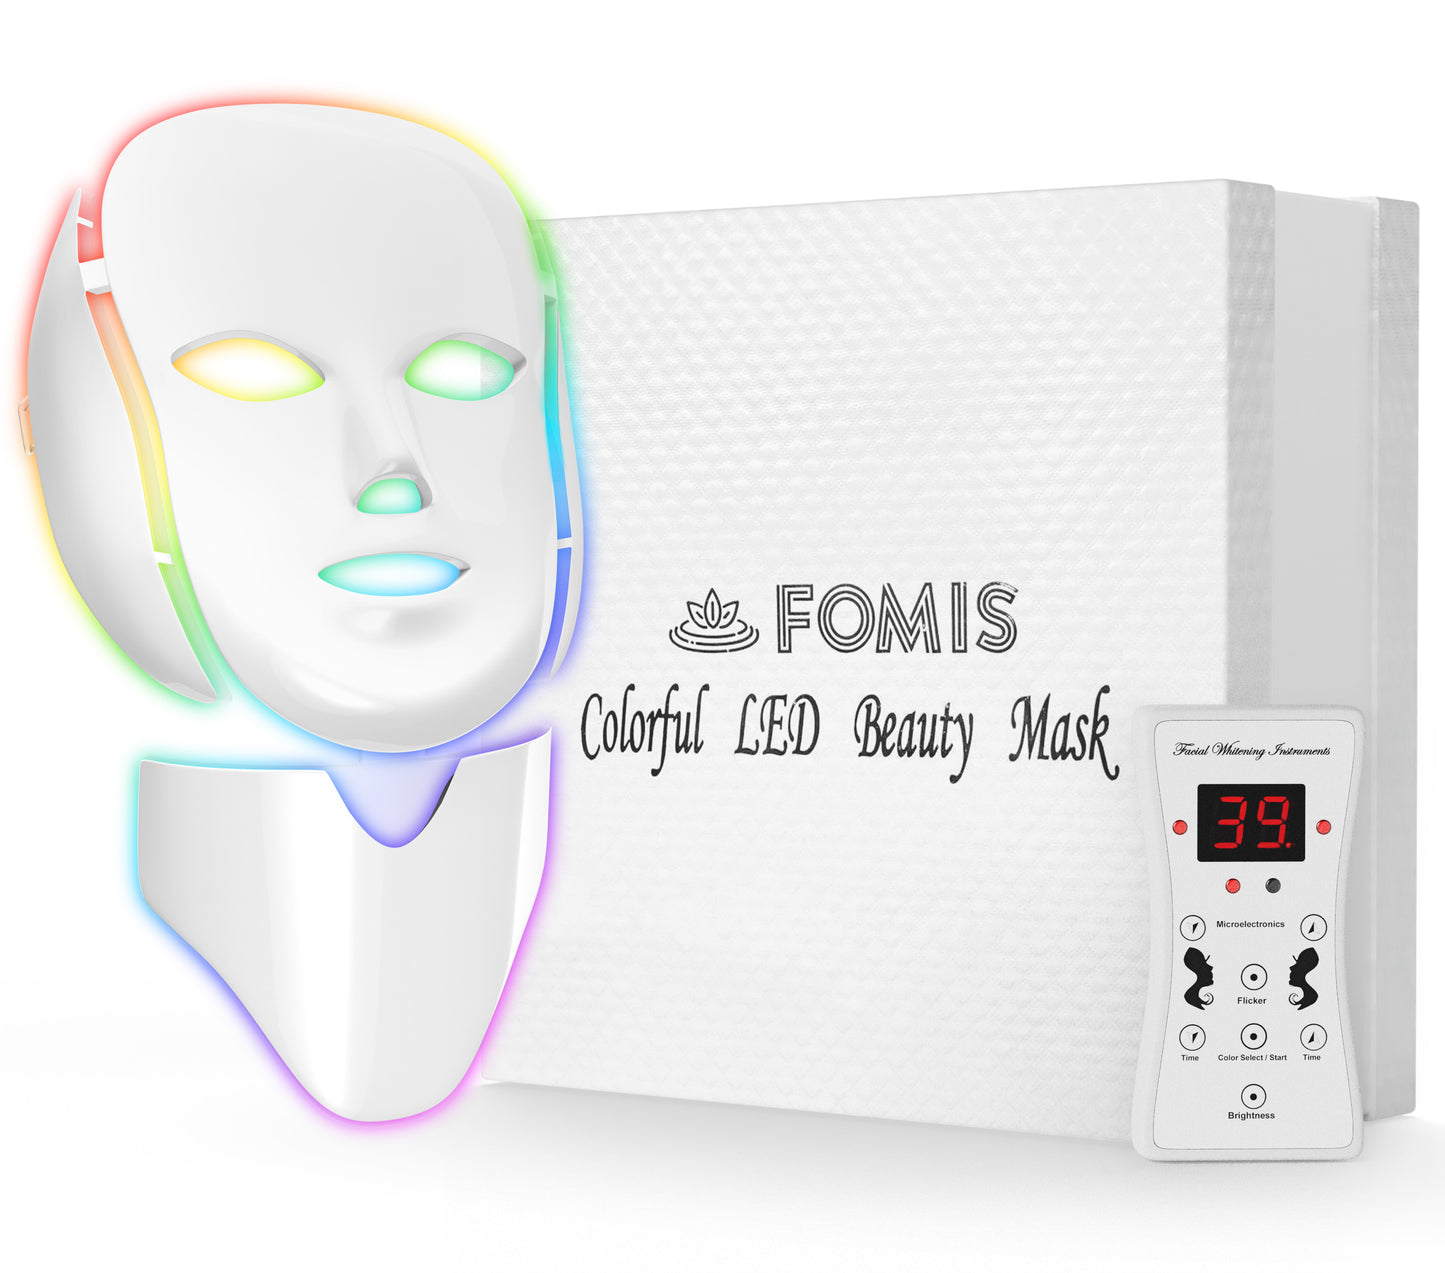 LED Light facial therapy mask-LED light mask for beauty therapy